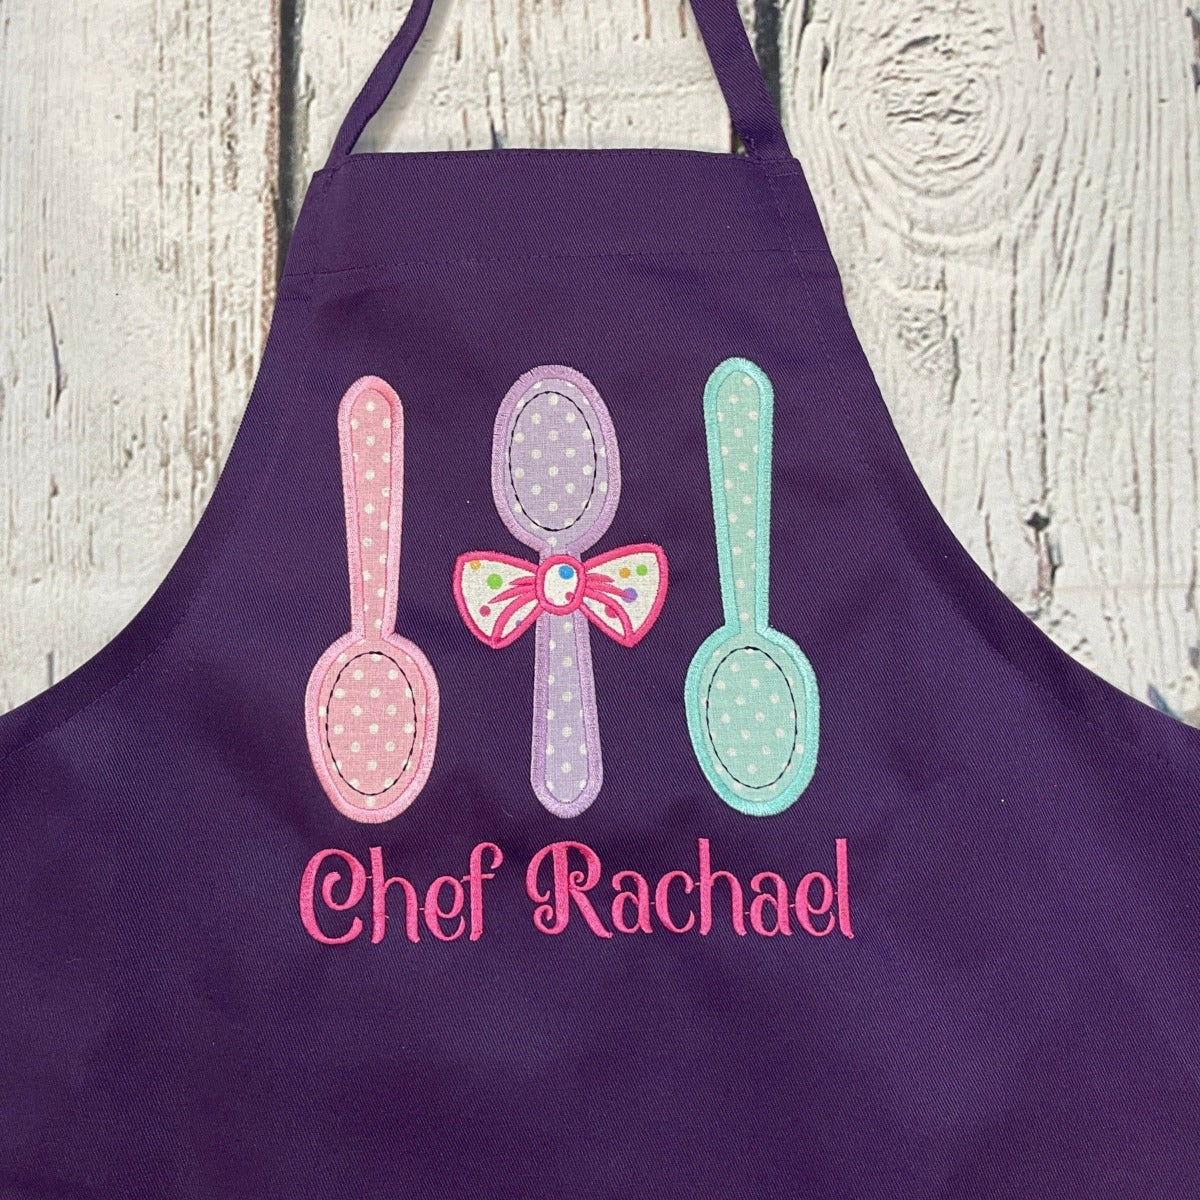 Girls Personalized Embroidered Apron with Cute Spoon Design & their Name